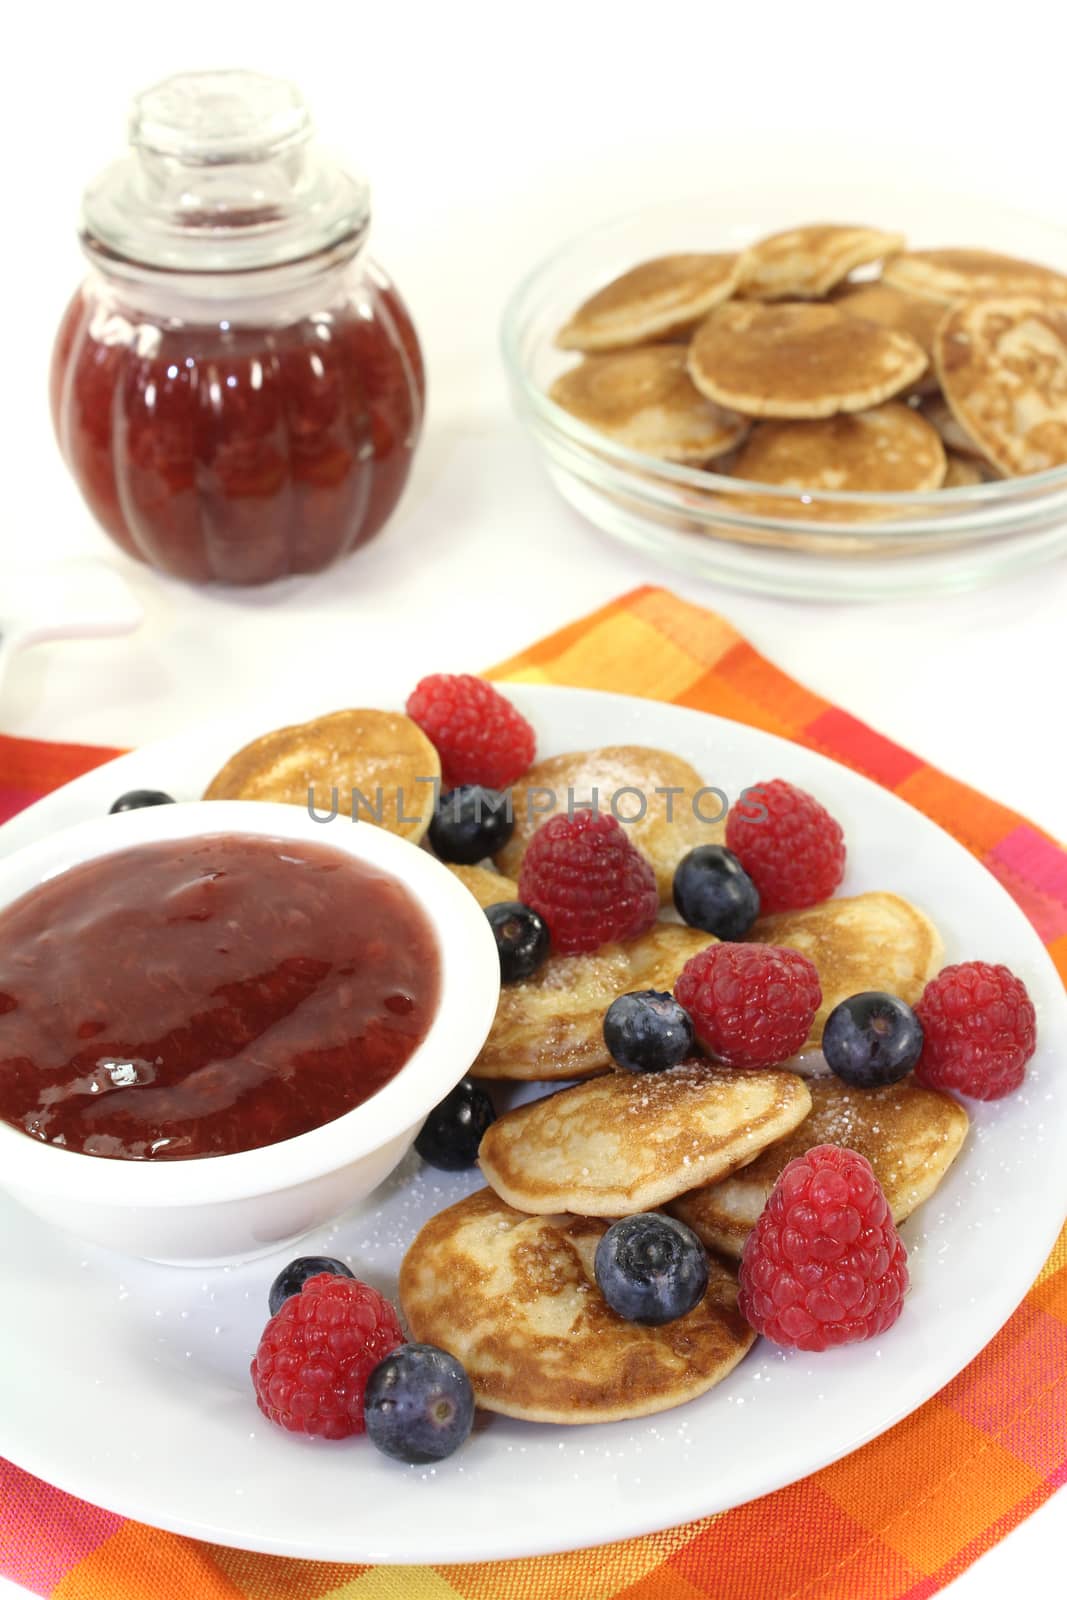 Poffertjes with berries and jelly by discovery